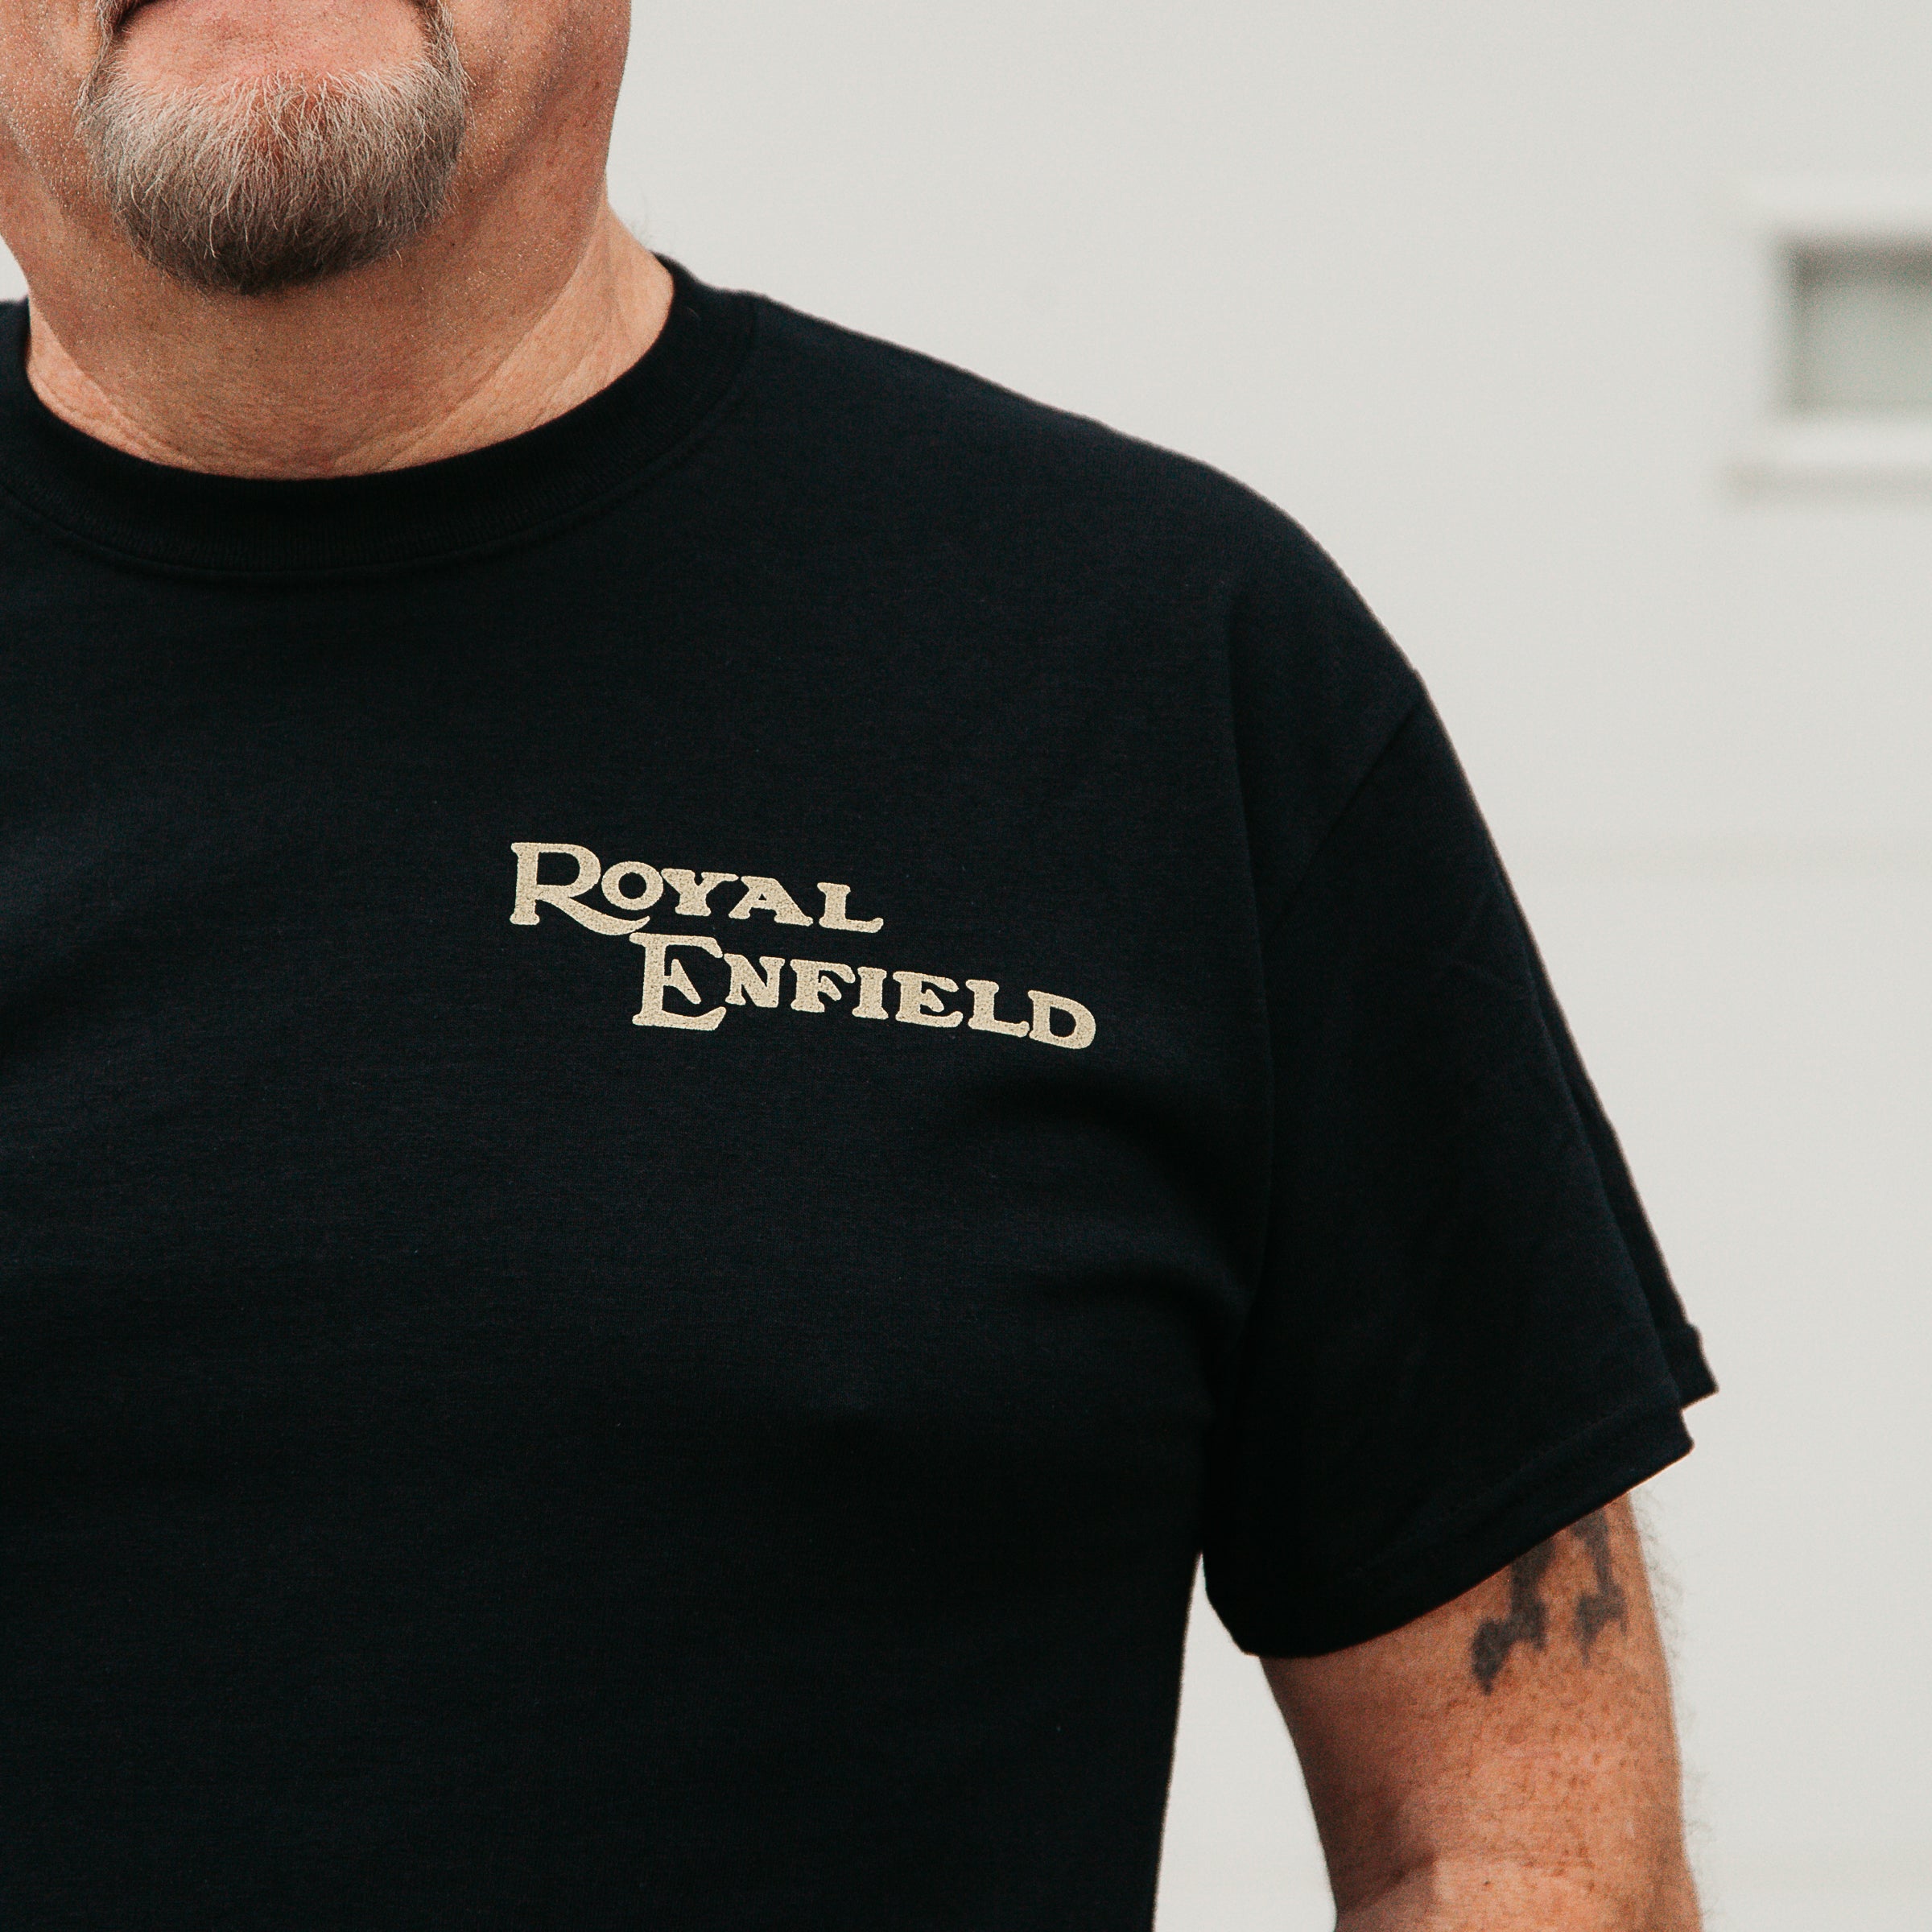 Dreamcycle Motorcycle Museum |  Mans shoulder wearing black shirt with text "Royal Enfield" in lifestyle setting .